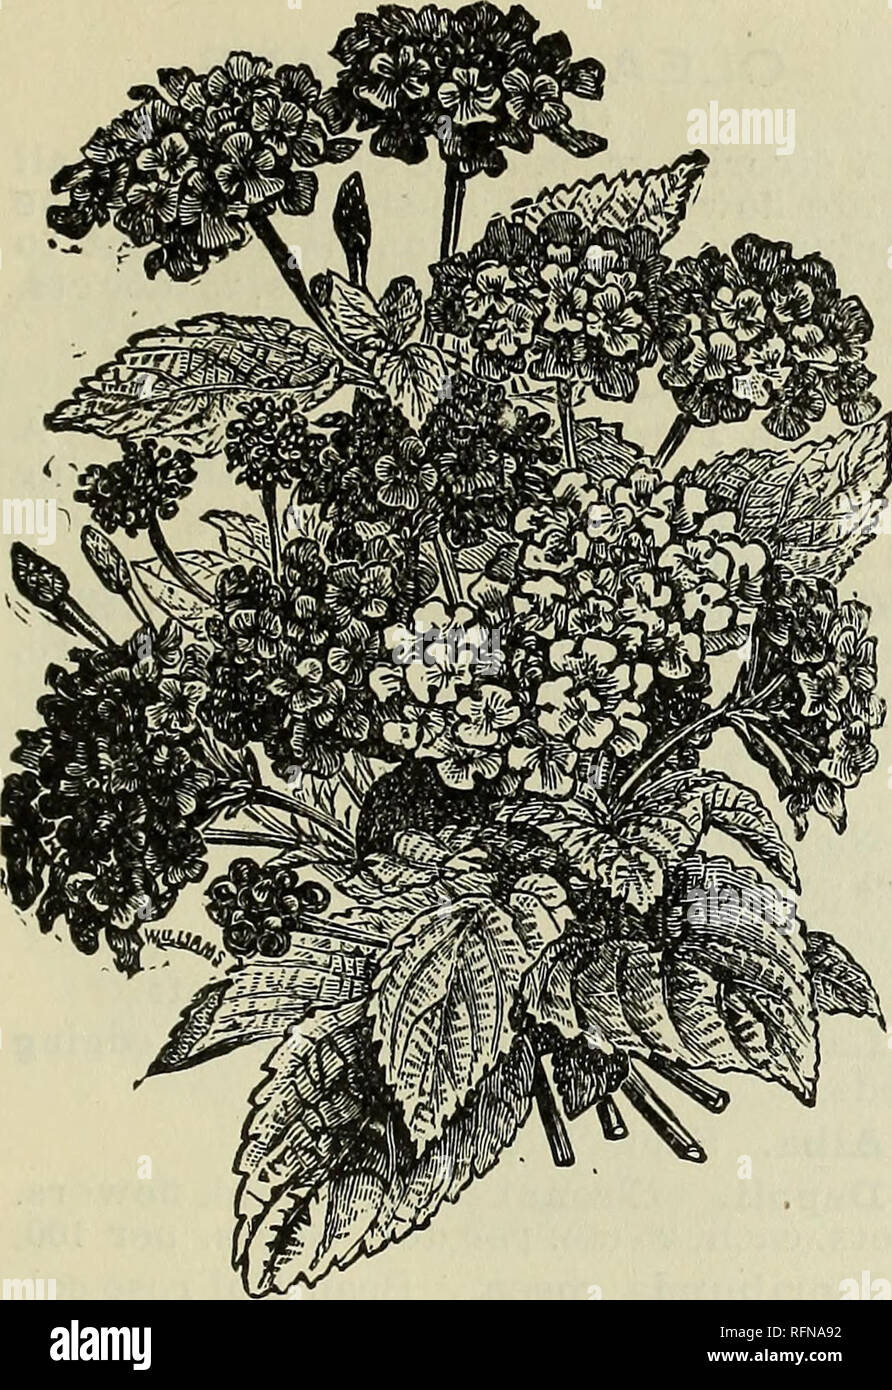 . Catalogue of useful greenhouse and bedding plants : spring-summer, 1897. Nurseries (Horticulture) Georgia Gainesville Catalogs; Roses Catalogs; Flowers Catalogs. Piedmont. LANTANA. LANTANAS. One of the best summer-flowering plants for our climate; equally fine in dry or wet weather, sun or shade. There are few bedding plants that bloom more contin- uously or afford a greater variety of color. When grown with a single stem and trained as standards, with fine bushy tops and straight stem, they present an effect that is surpassed by few plants. Comtesse Morny. Flowers lemon color. Favorita. Yel Stock Photo